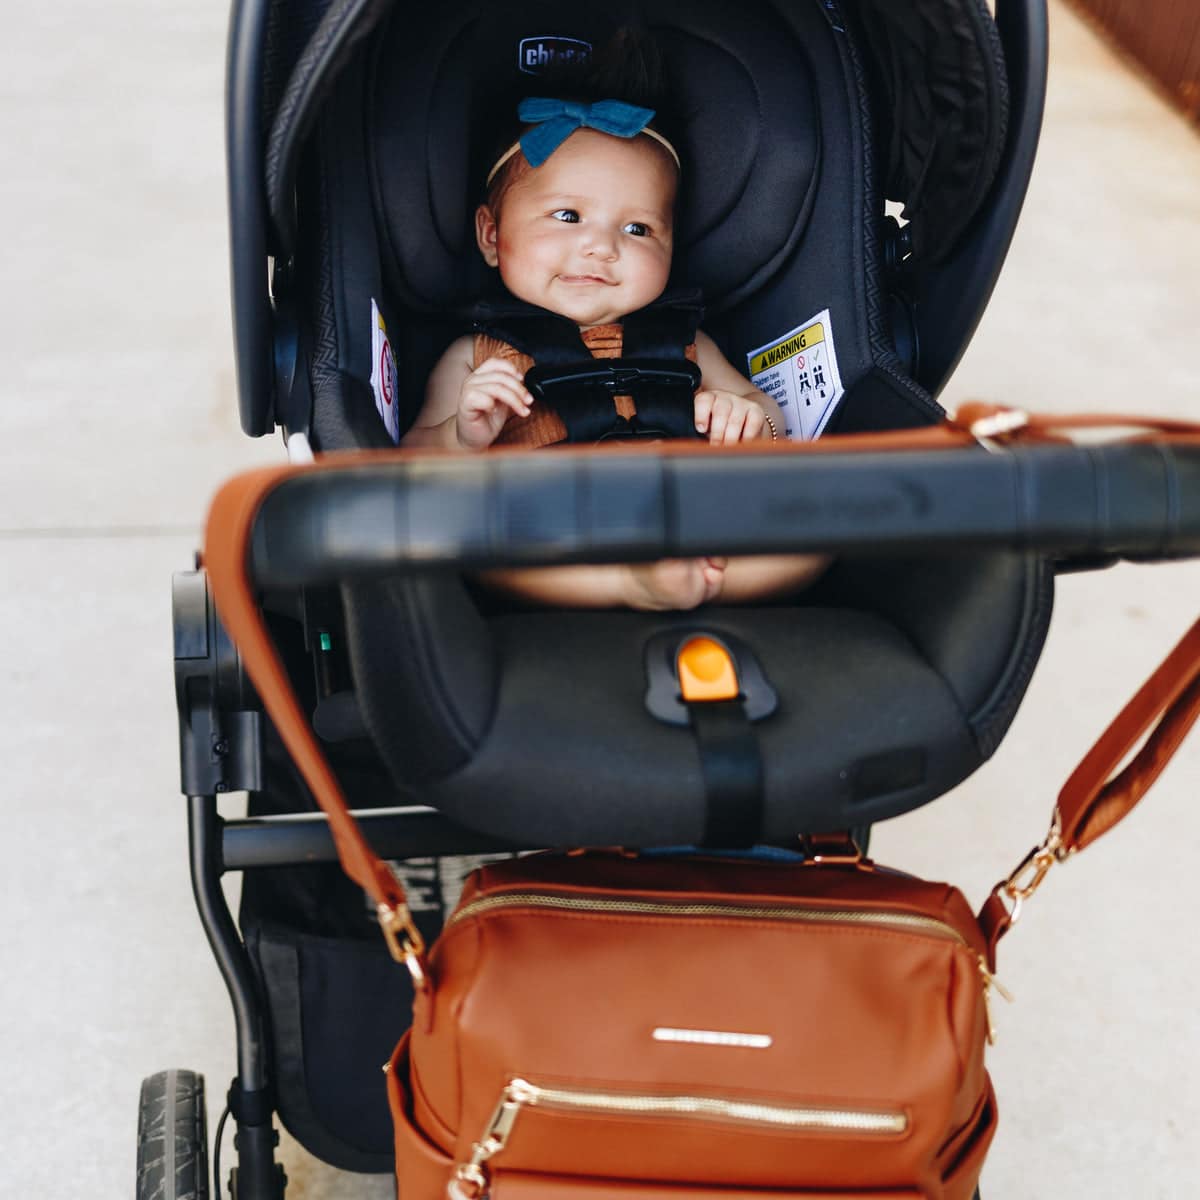 Lorenda Djanie What To Pack In Diaper Bag For Birth? Youve been ...